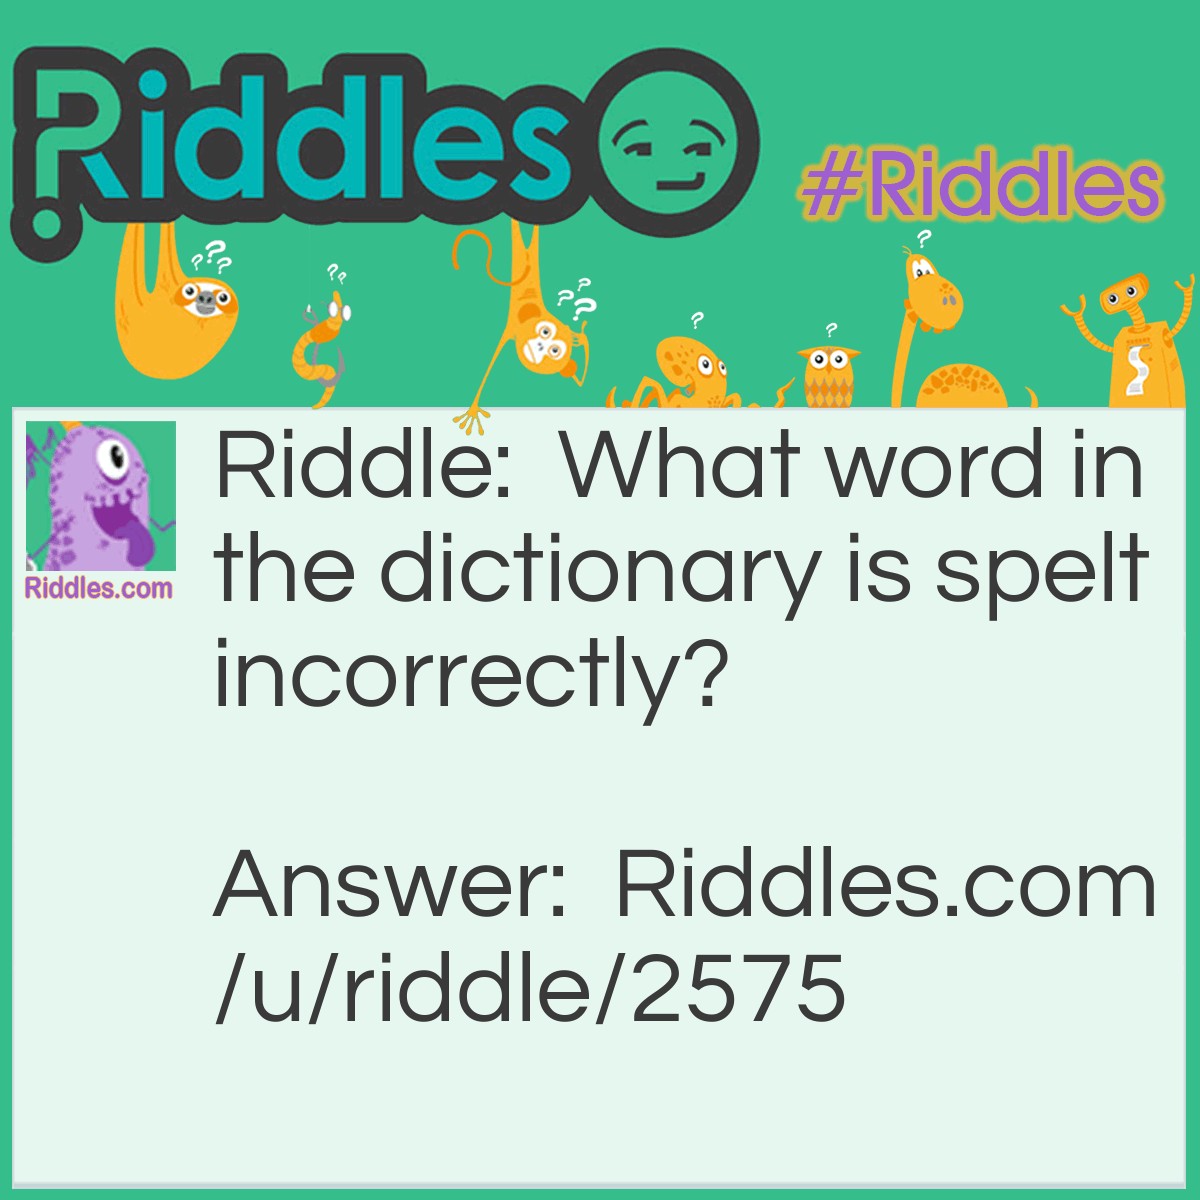 Riddle: What word in the dictionary is spelt incorrectly? Answer: Incorrectly.